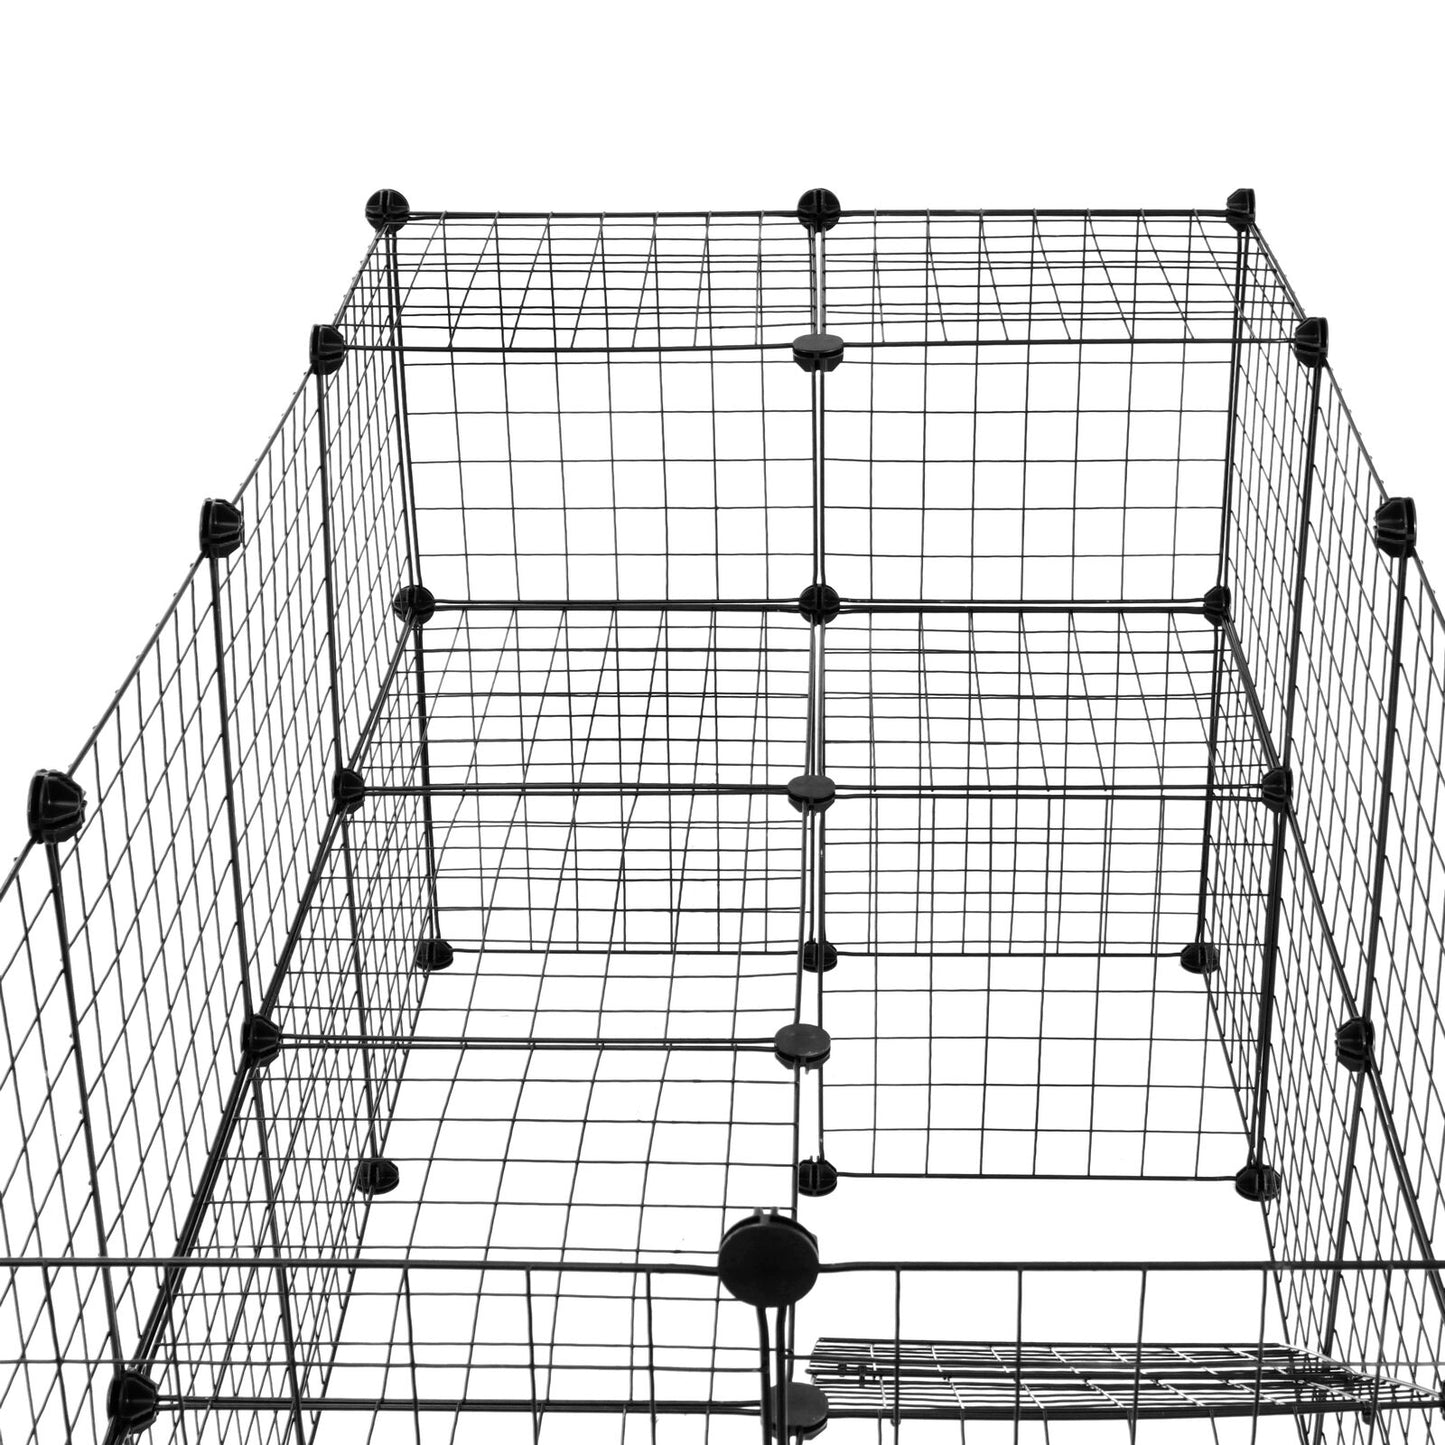 56 Inch 36 Panels Two-Storey Fence Kennel Dog Playpen Pet Play Pen Exercise Cage